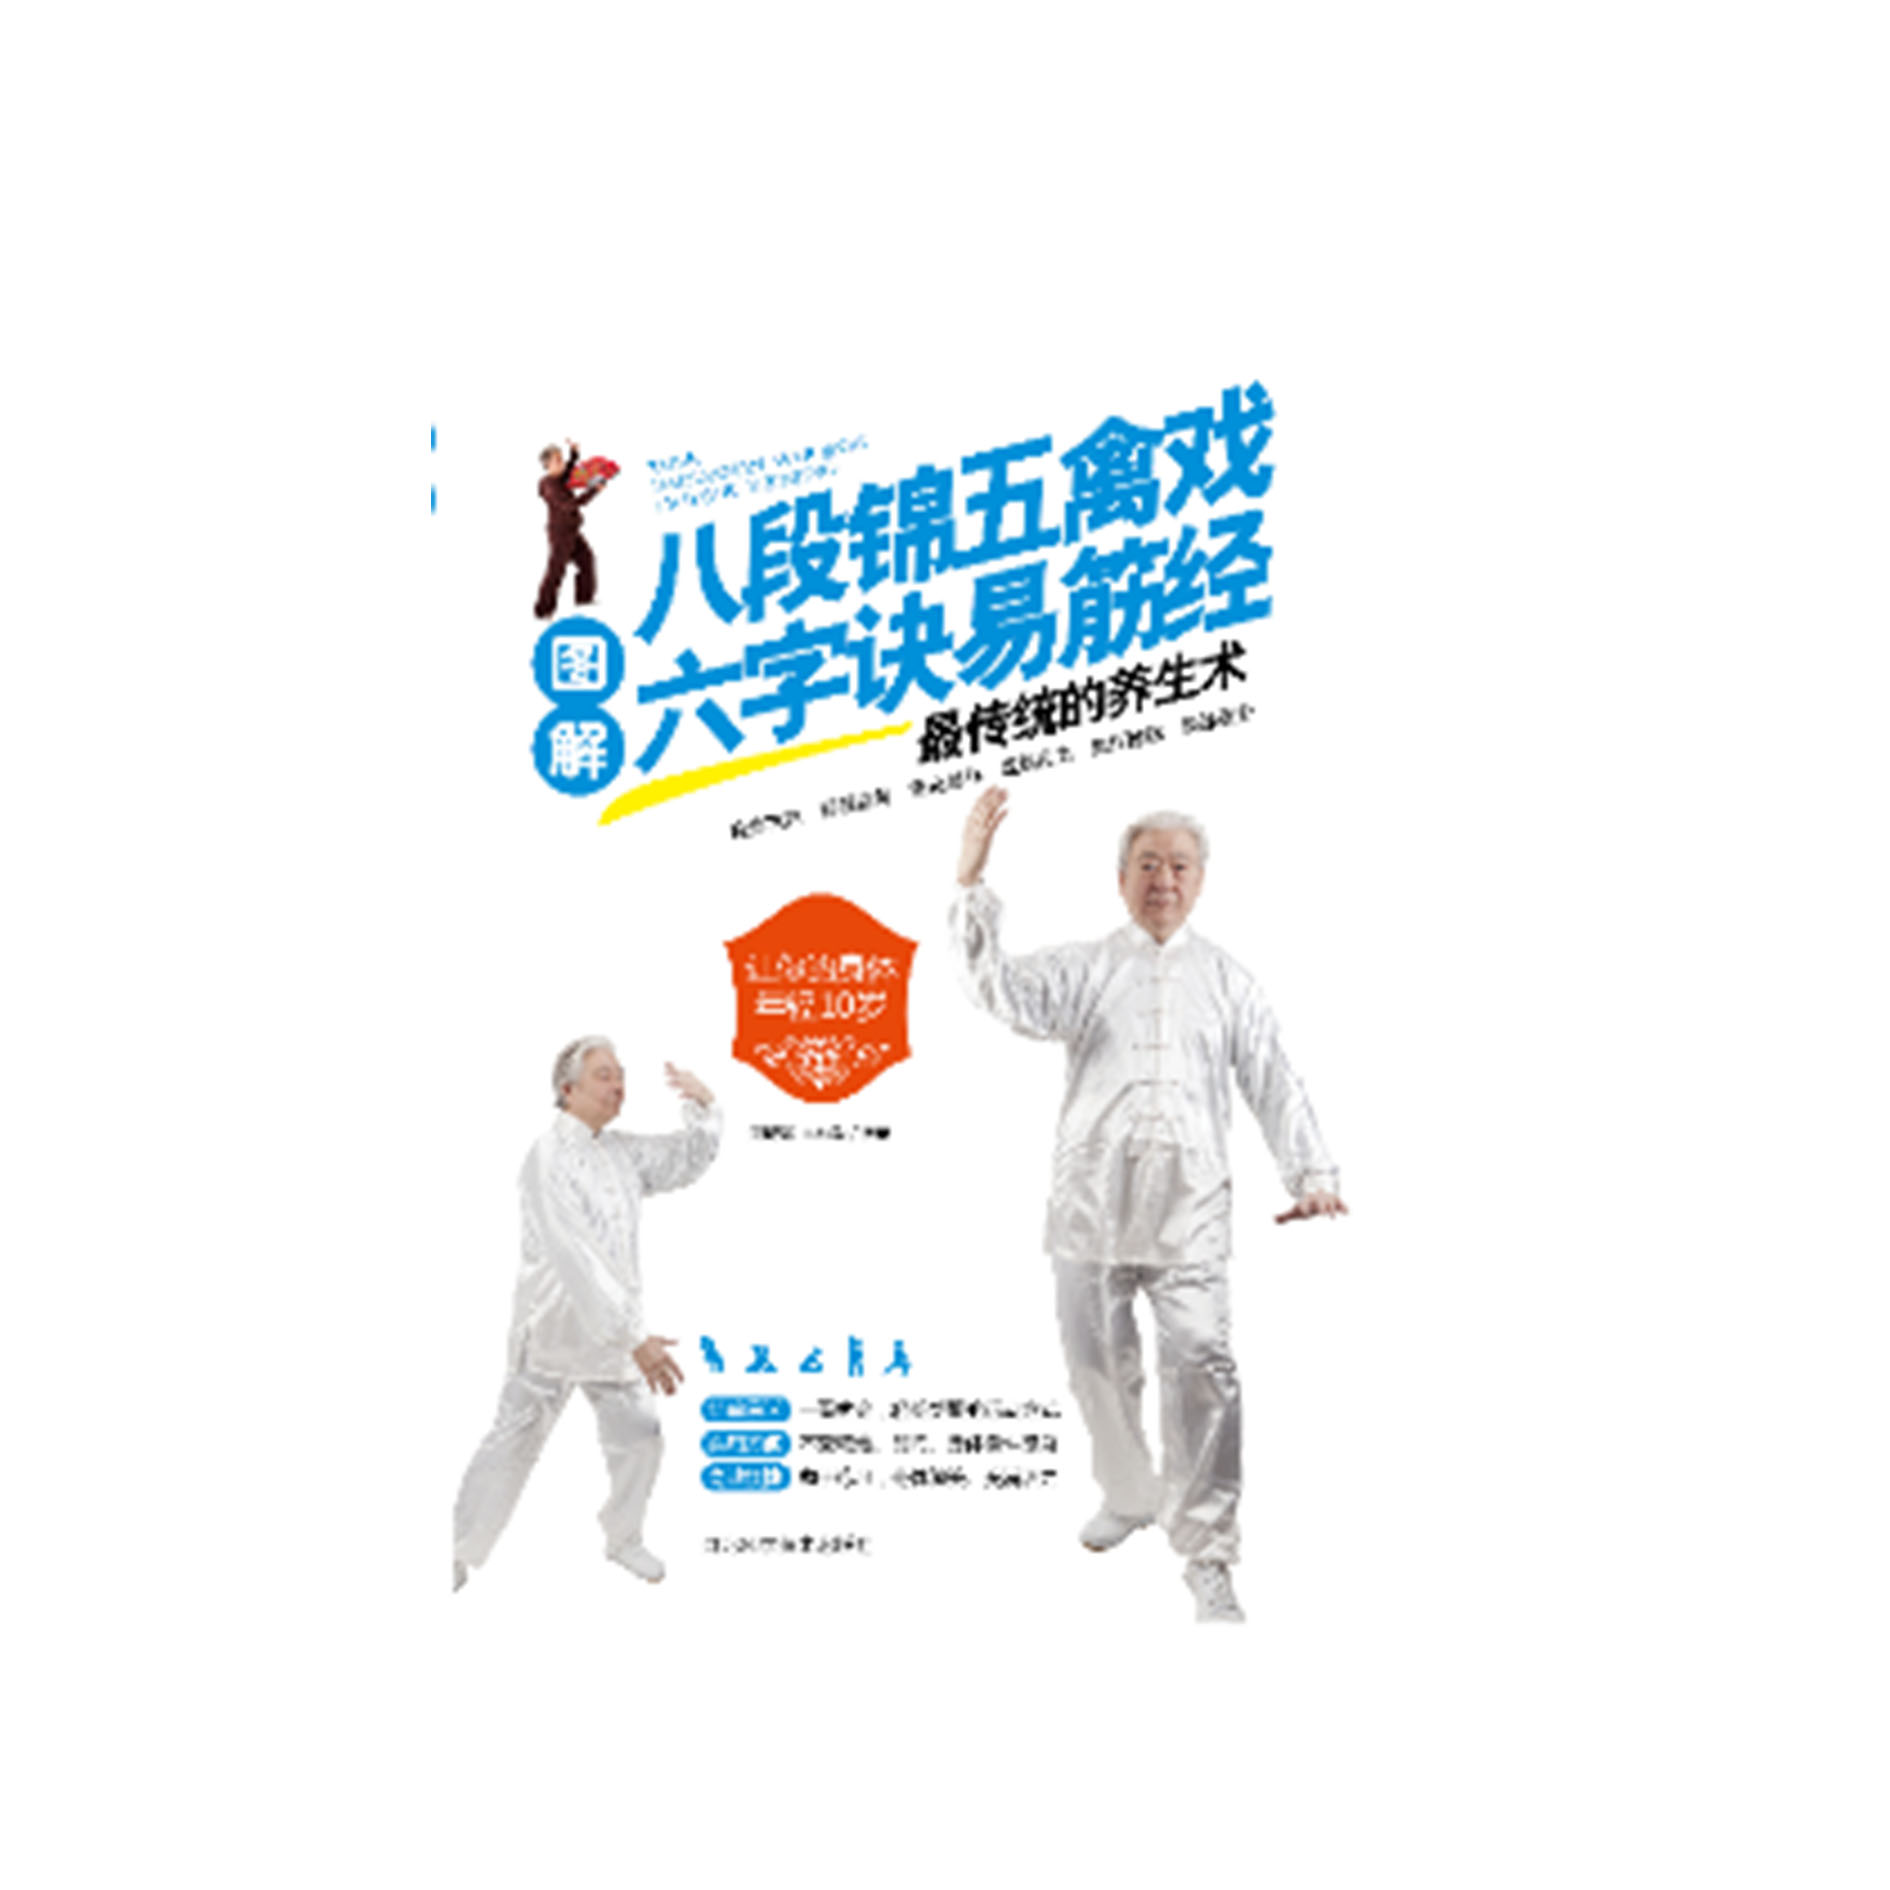 Illustrated guide to the movements of Ba Duan Jin, Wu Qin Xi,